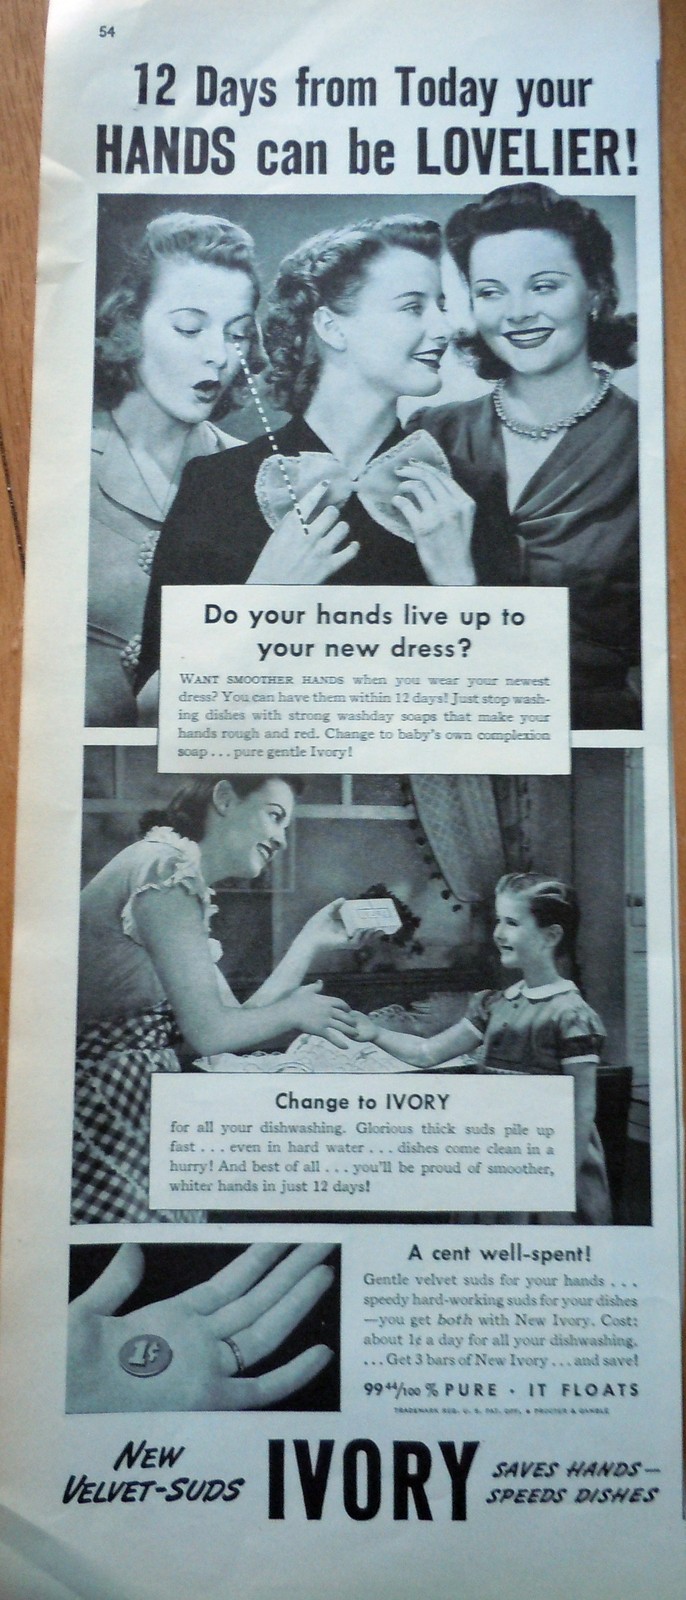 Ivory Soap 12 Days Hands Can Be Lovelier Advertising Print Ad Art 1950s - $5.99